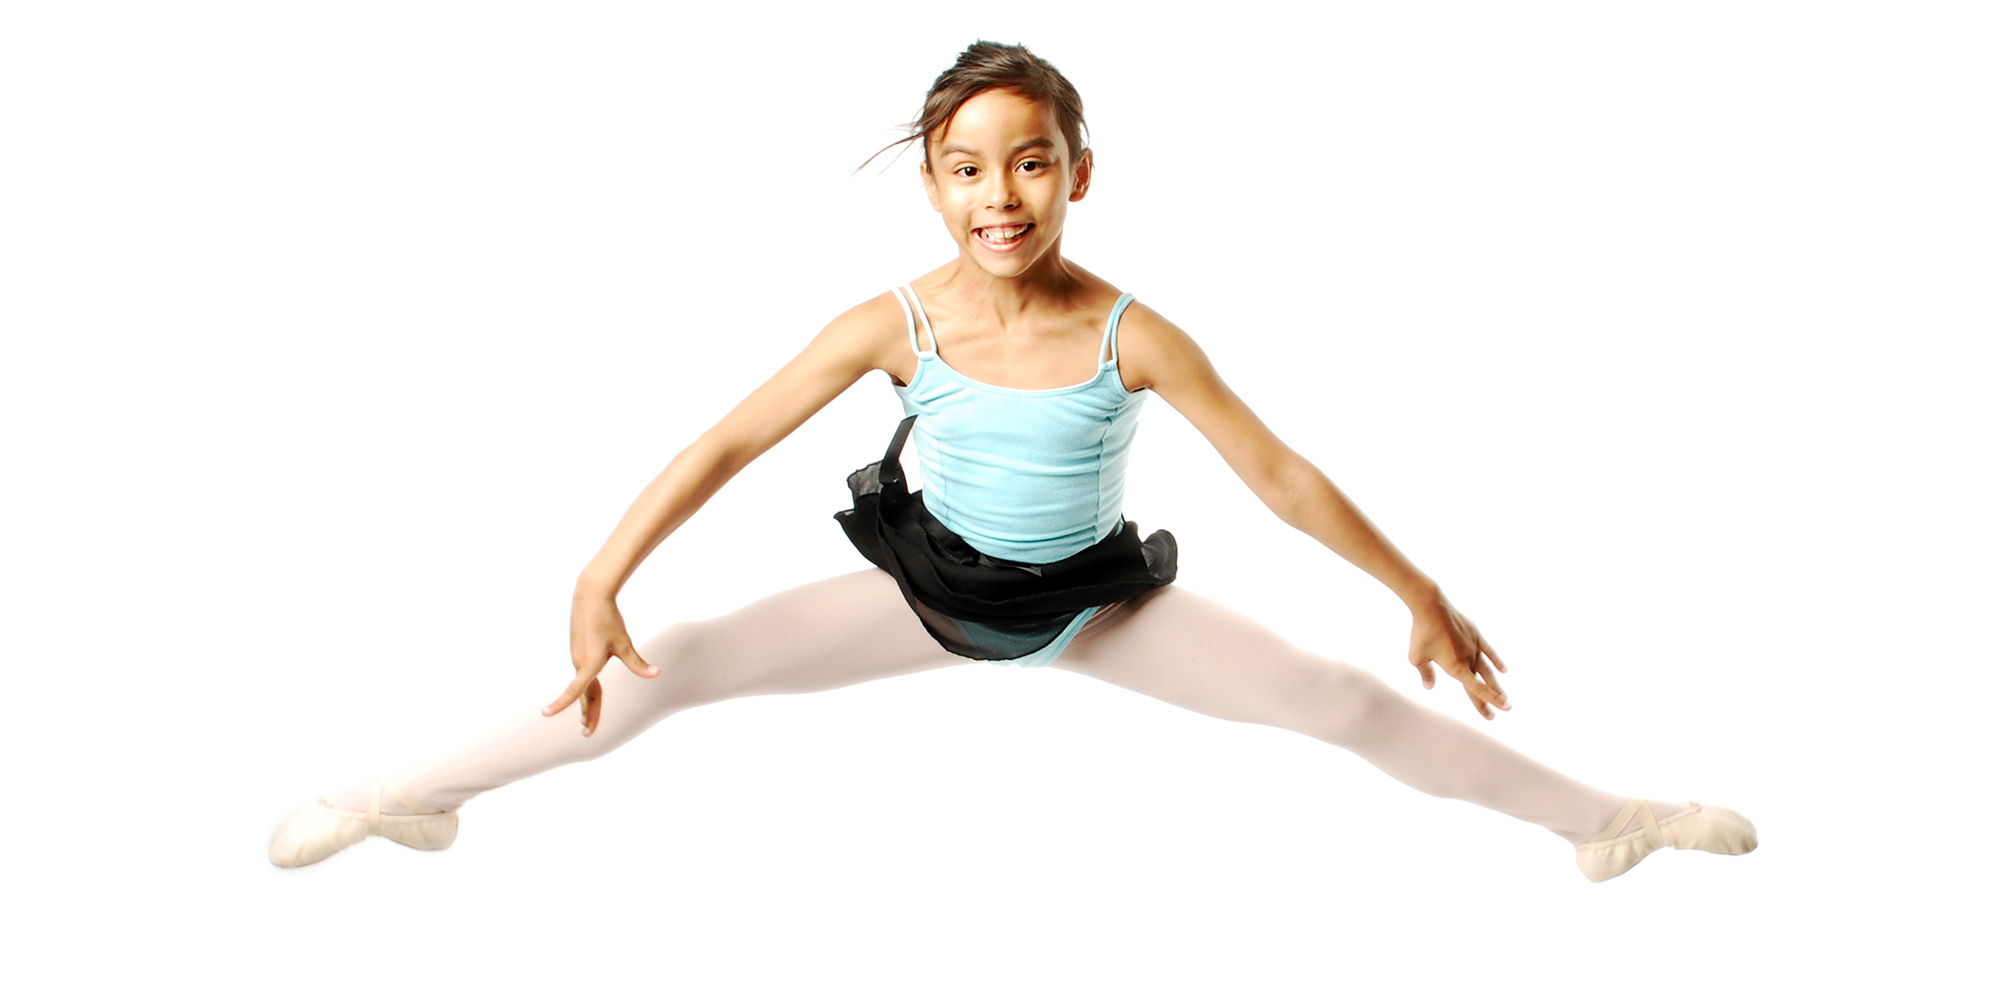 Young Ballerina Jumping on white background